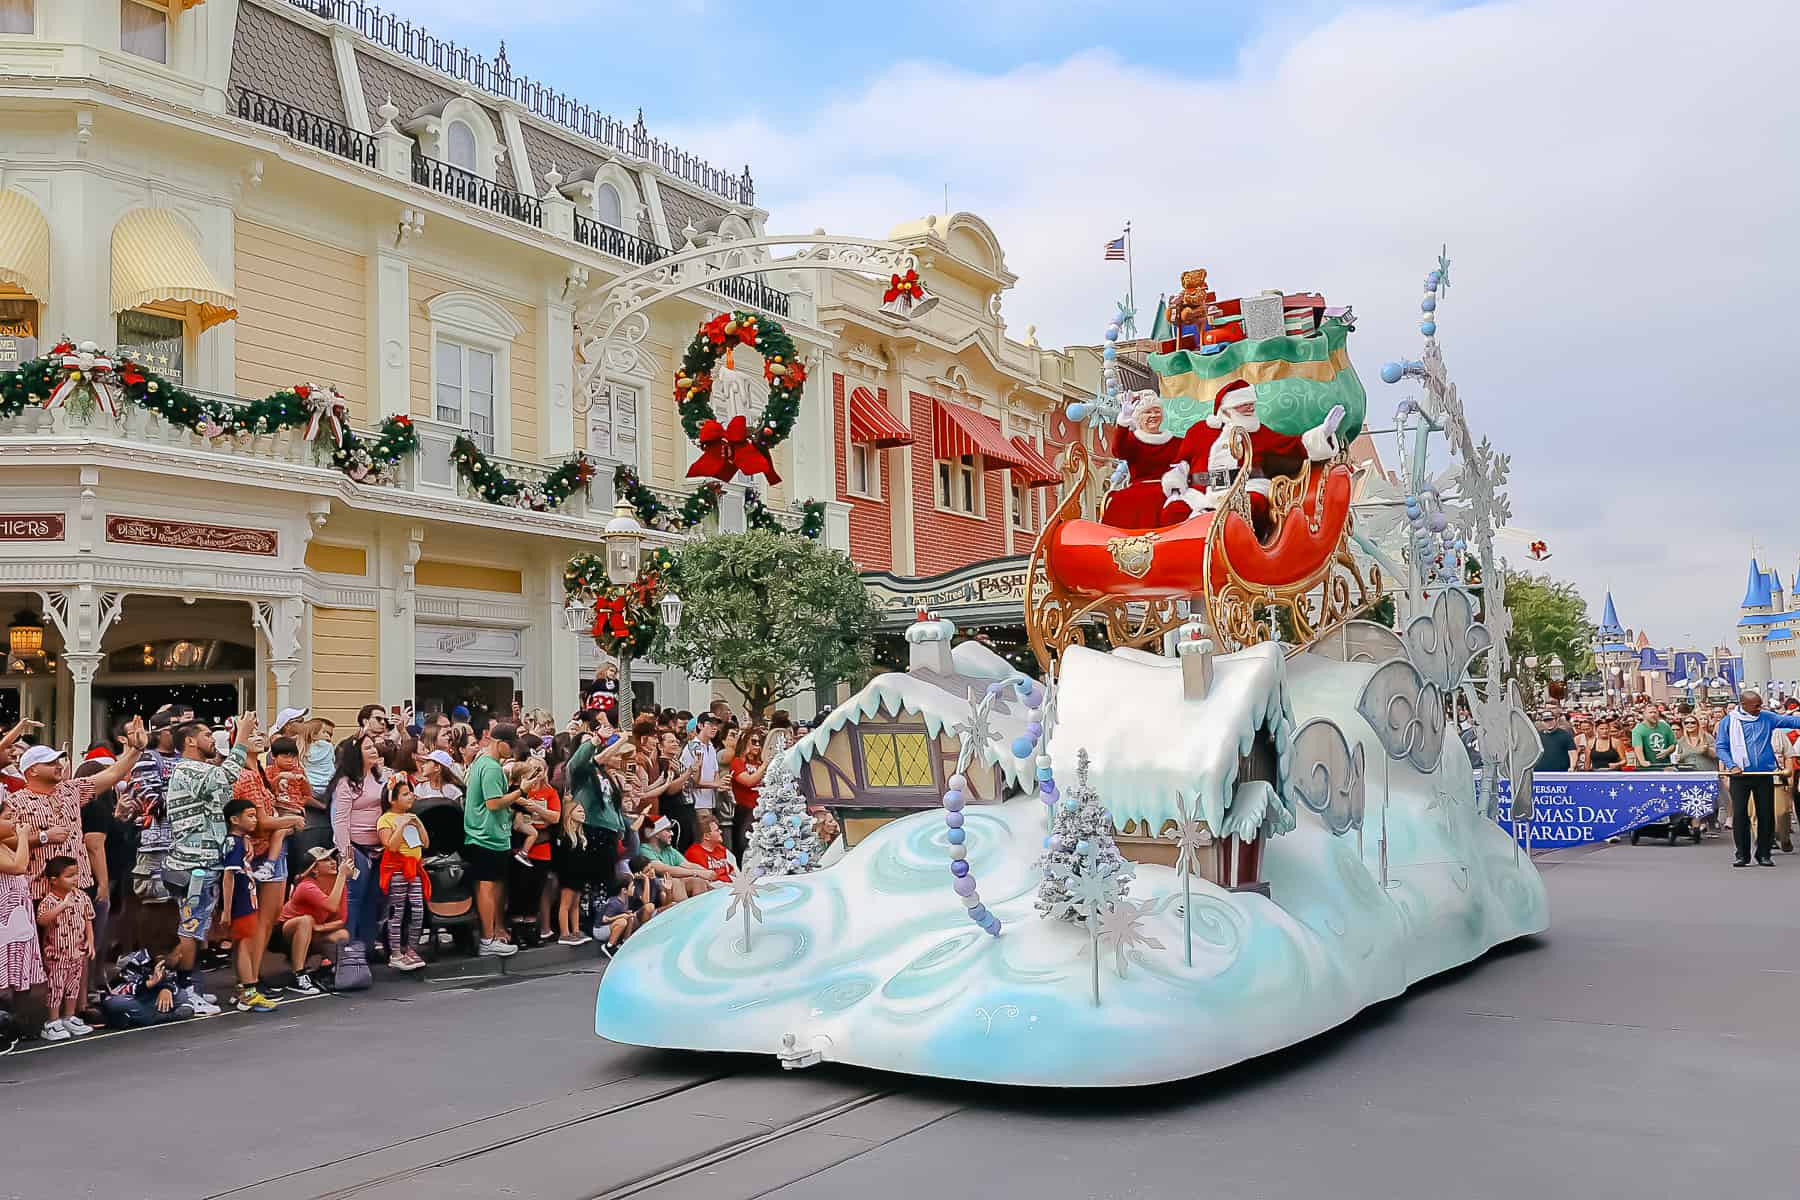 Santa and Mrs. Claus in Disney's Christmas parade. The float is a sleigh that's perched on snow covered roof. 